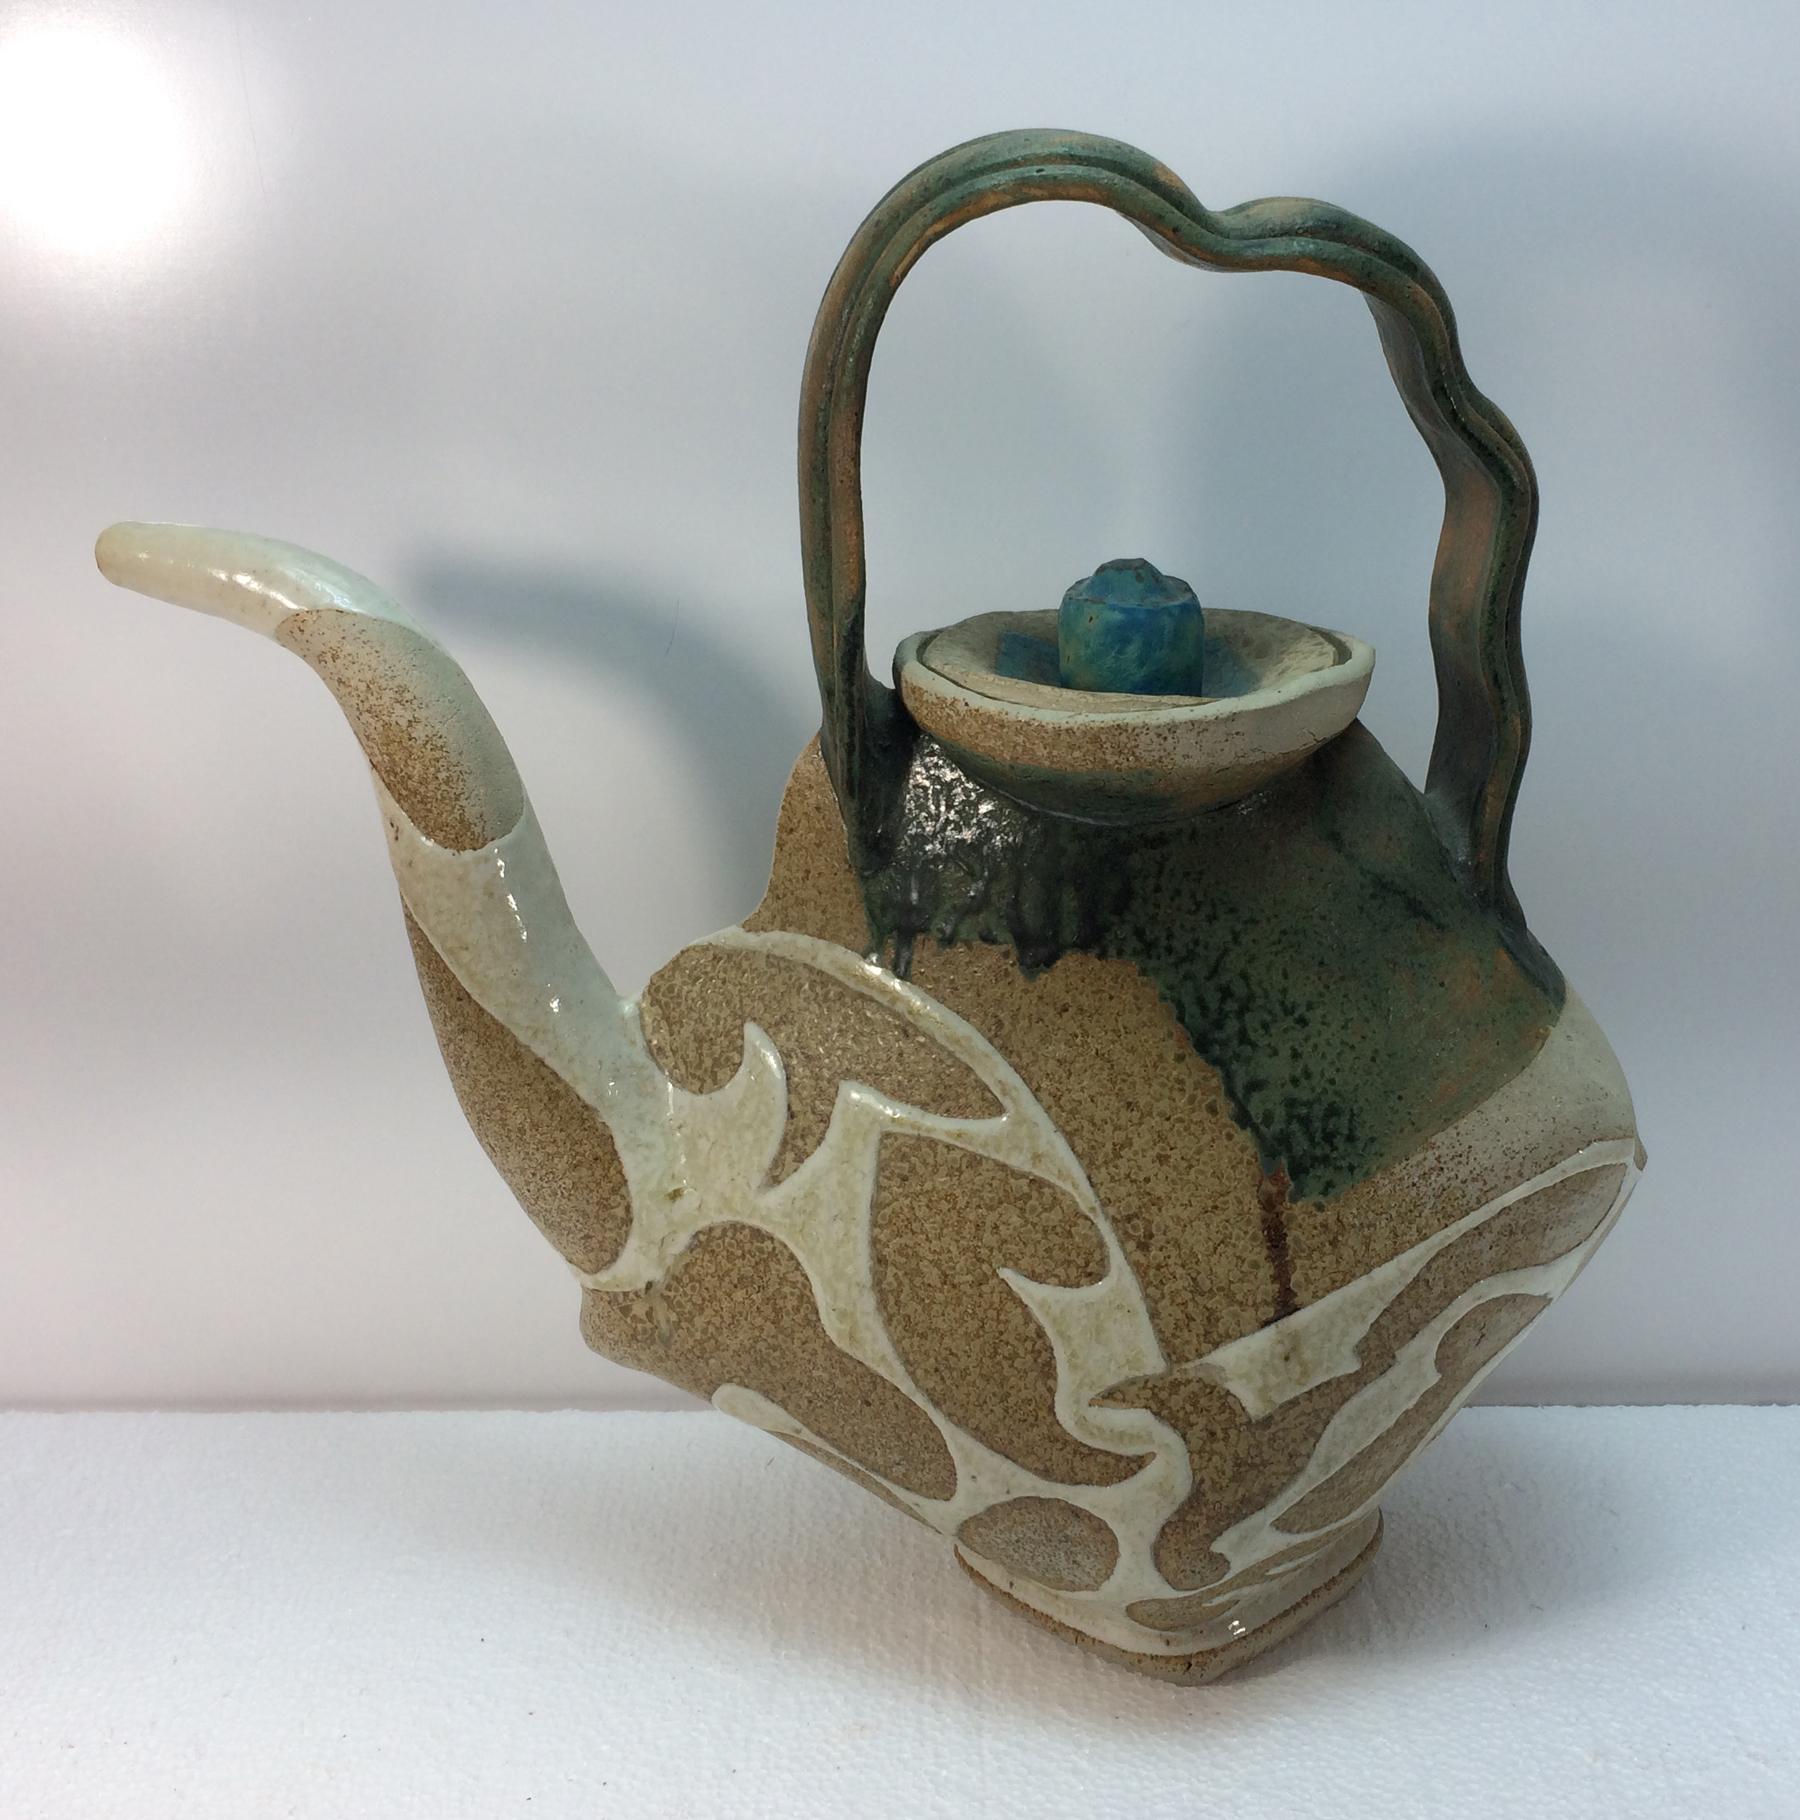 John Gill studio art pottery ewer abstract hand thrown raised glazed decoration. Signed and dated 1984 on the bottom. Gill was born in 1949. His work is part of many museums permanent art pottery collections. This vintage abstract ceramic is in